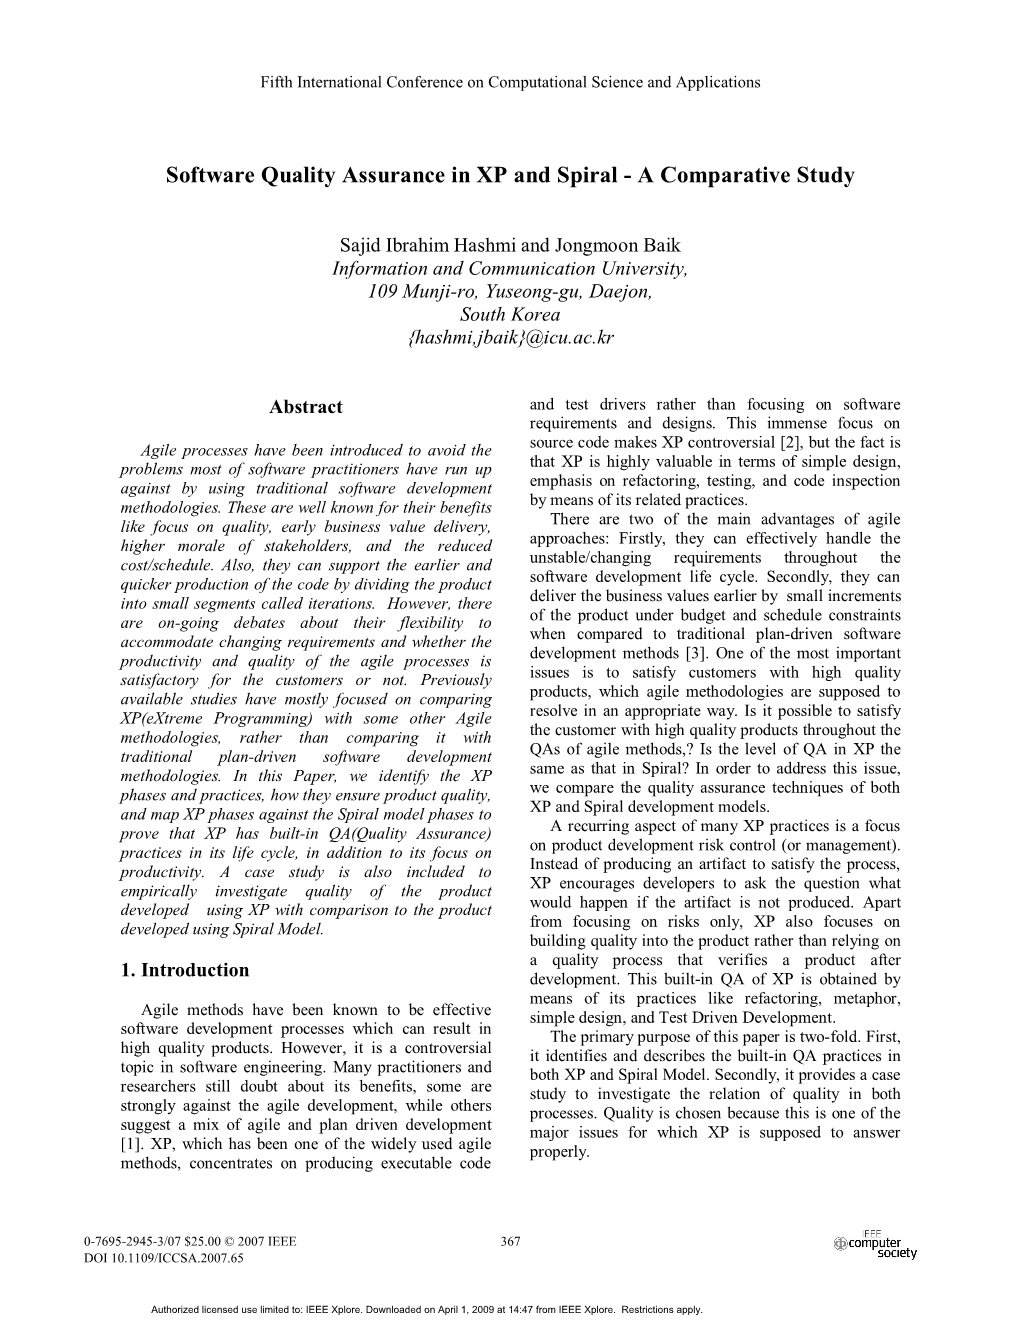 Software Quality Assurance in XP and Spiral - a Comparative Study